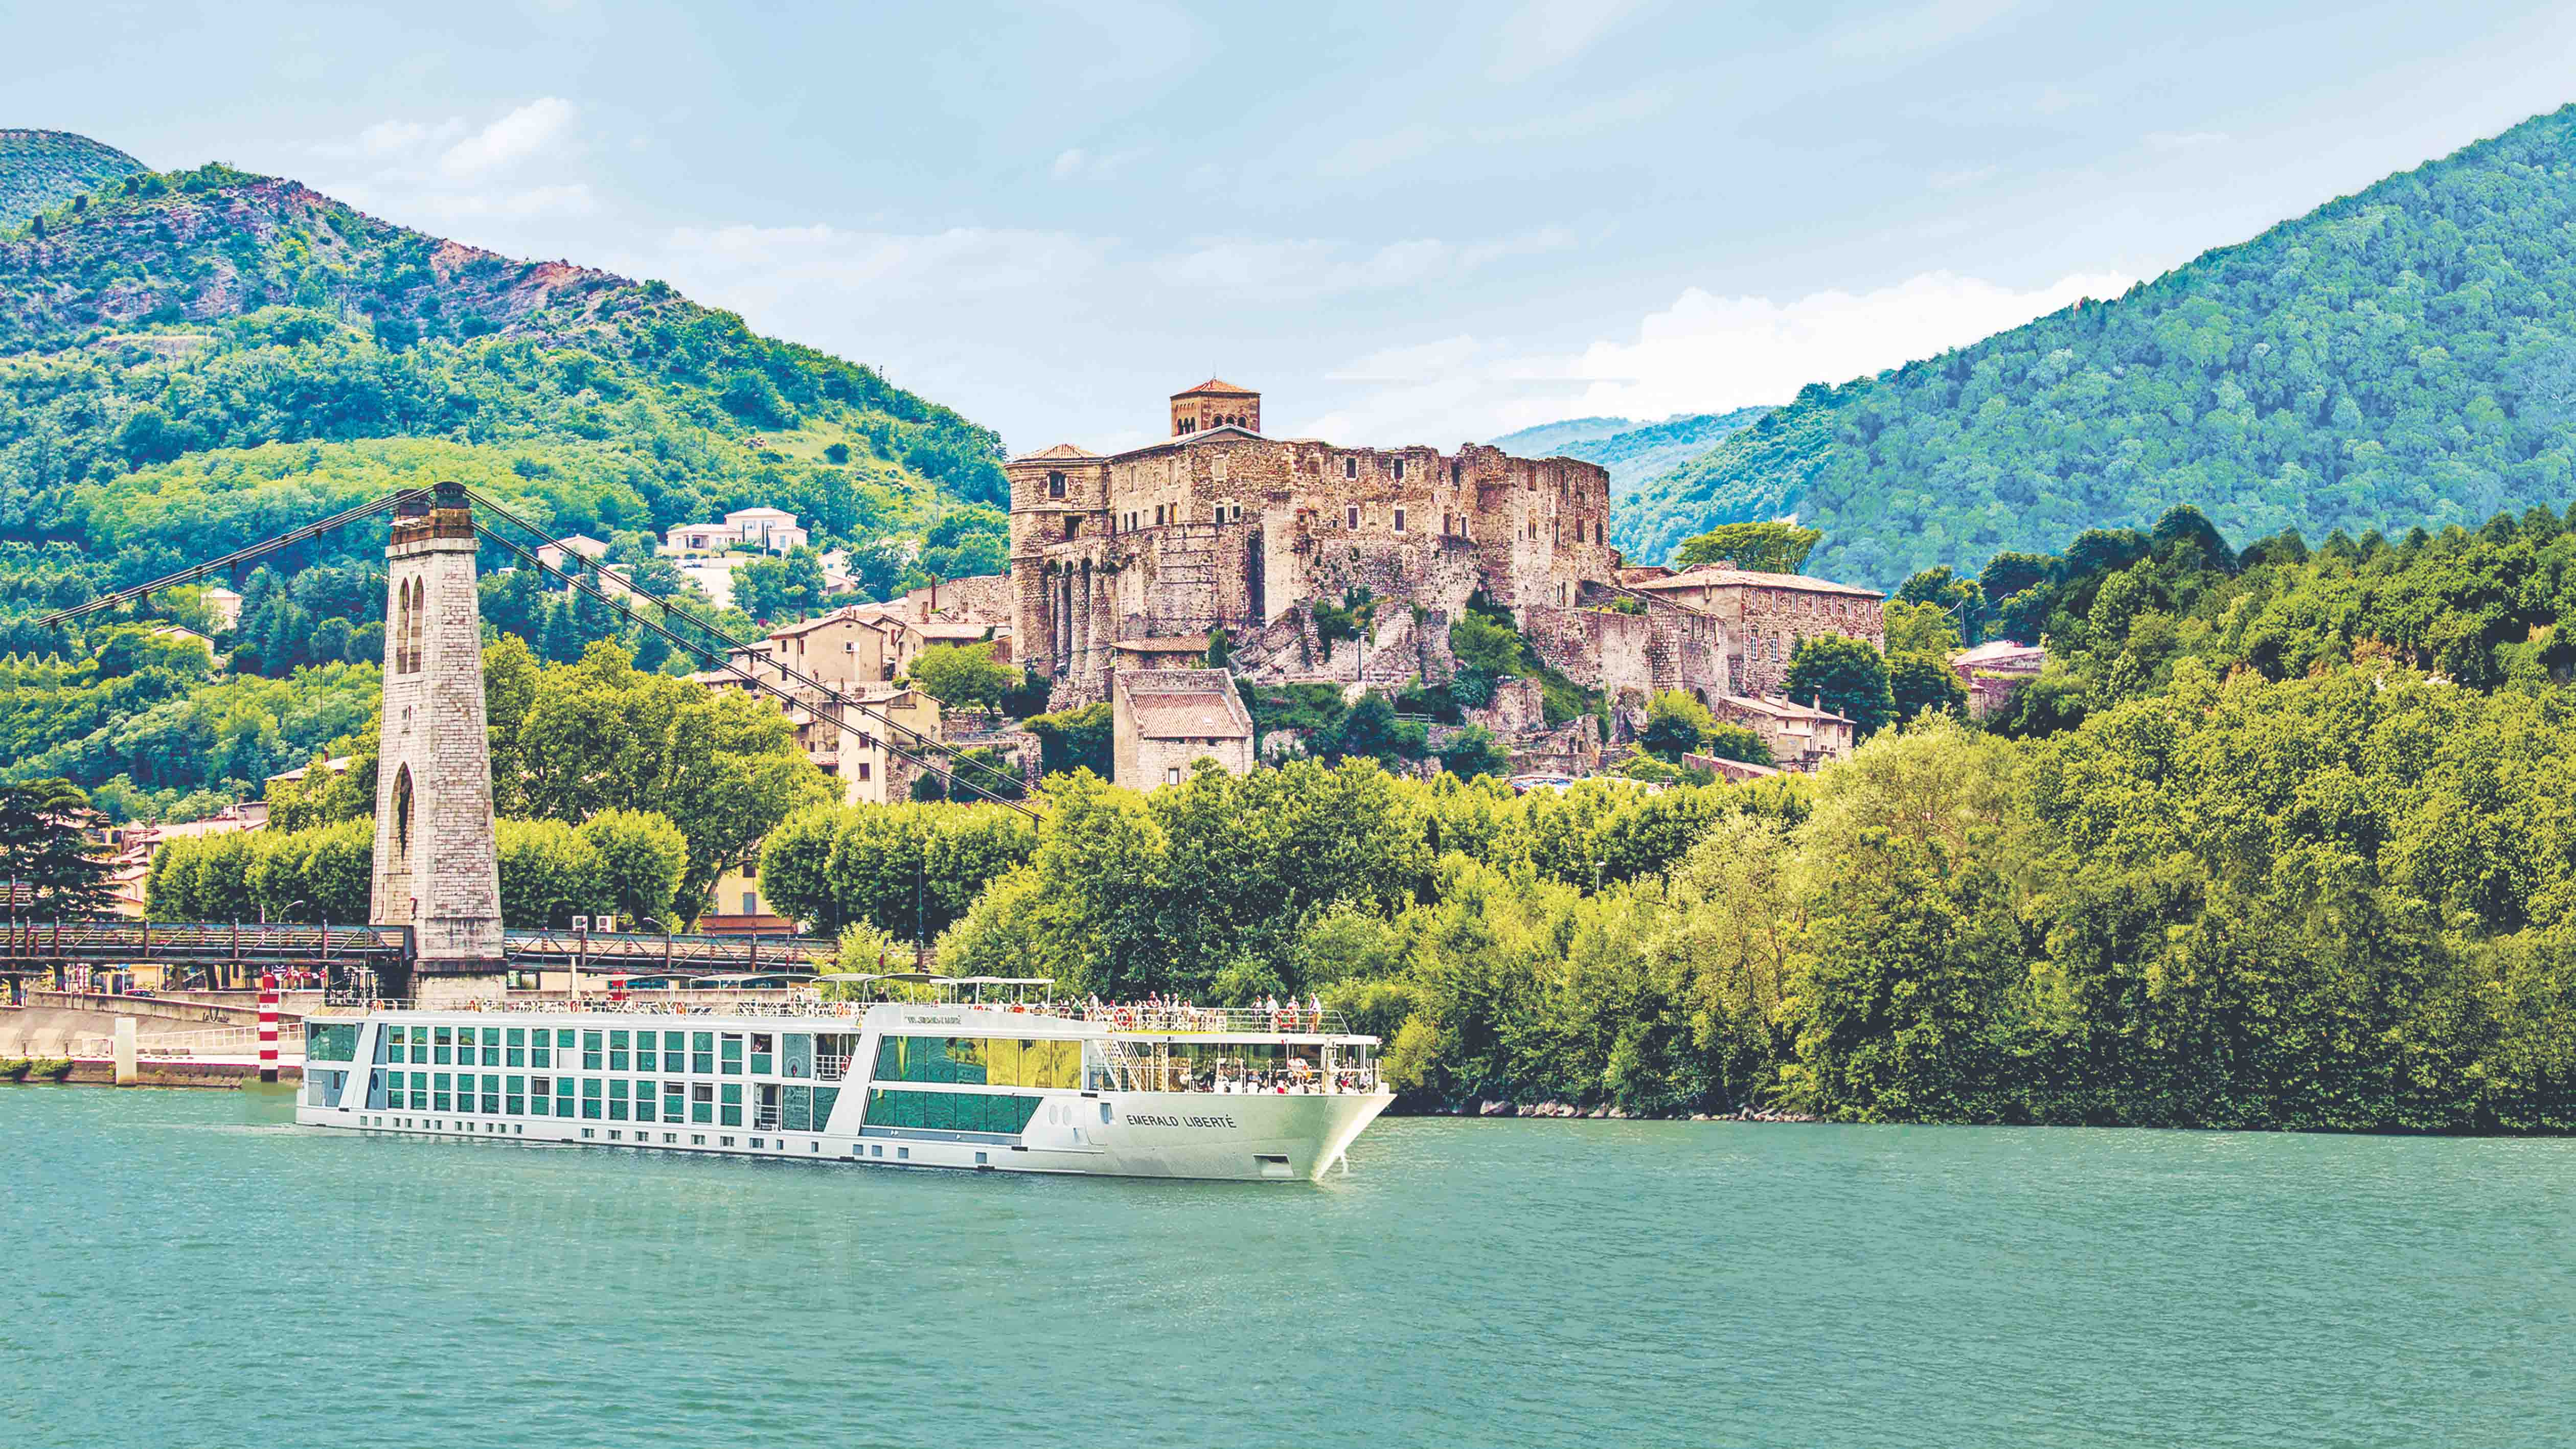 Luxury river ship sailing the Rhône River in the South of France passing a rustic castle